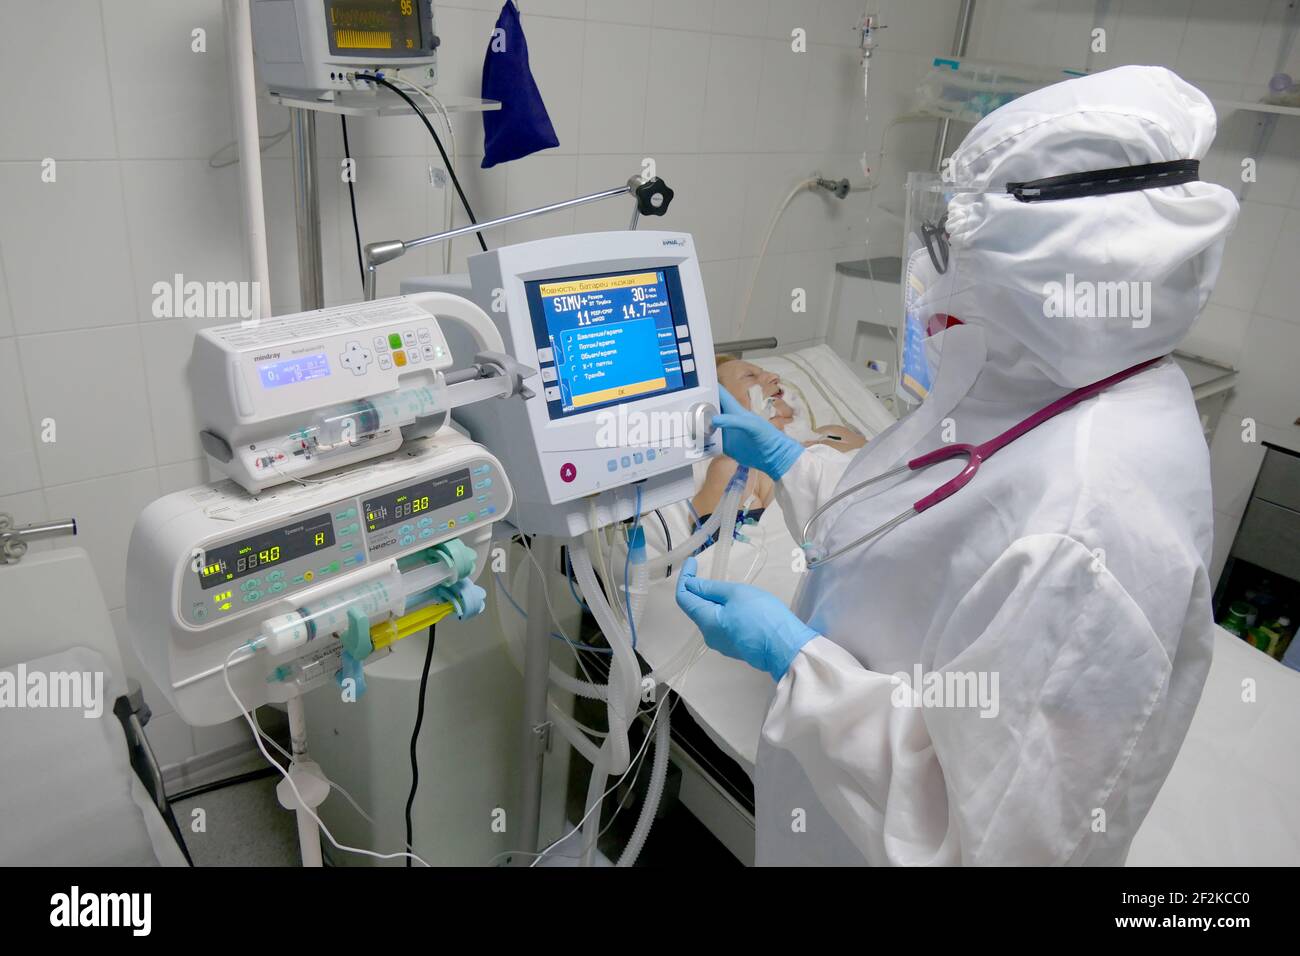 IVANO-FRANKIVSK, UKRAINE - MARCH 12, 2021 - A healthcare worker changes the settings of a ventilator in the COVID-19 ward of the Anesthesiology and In Stock Photo